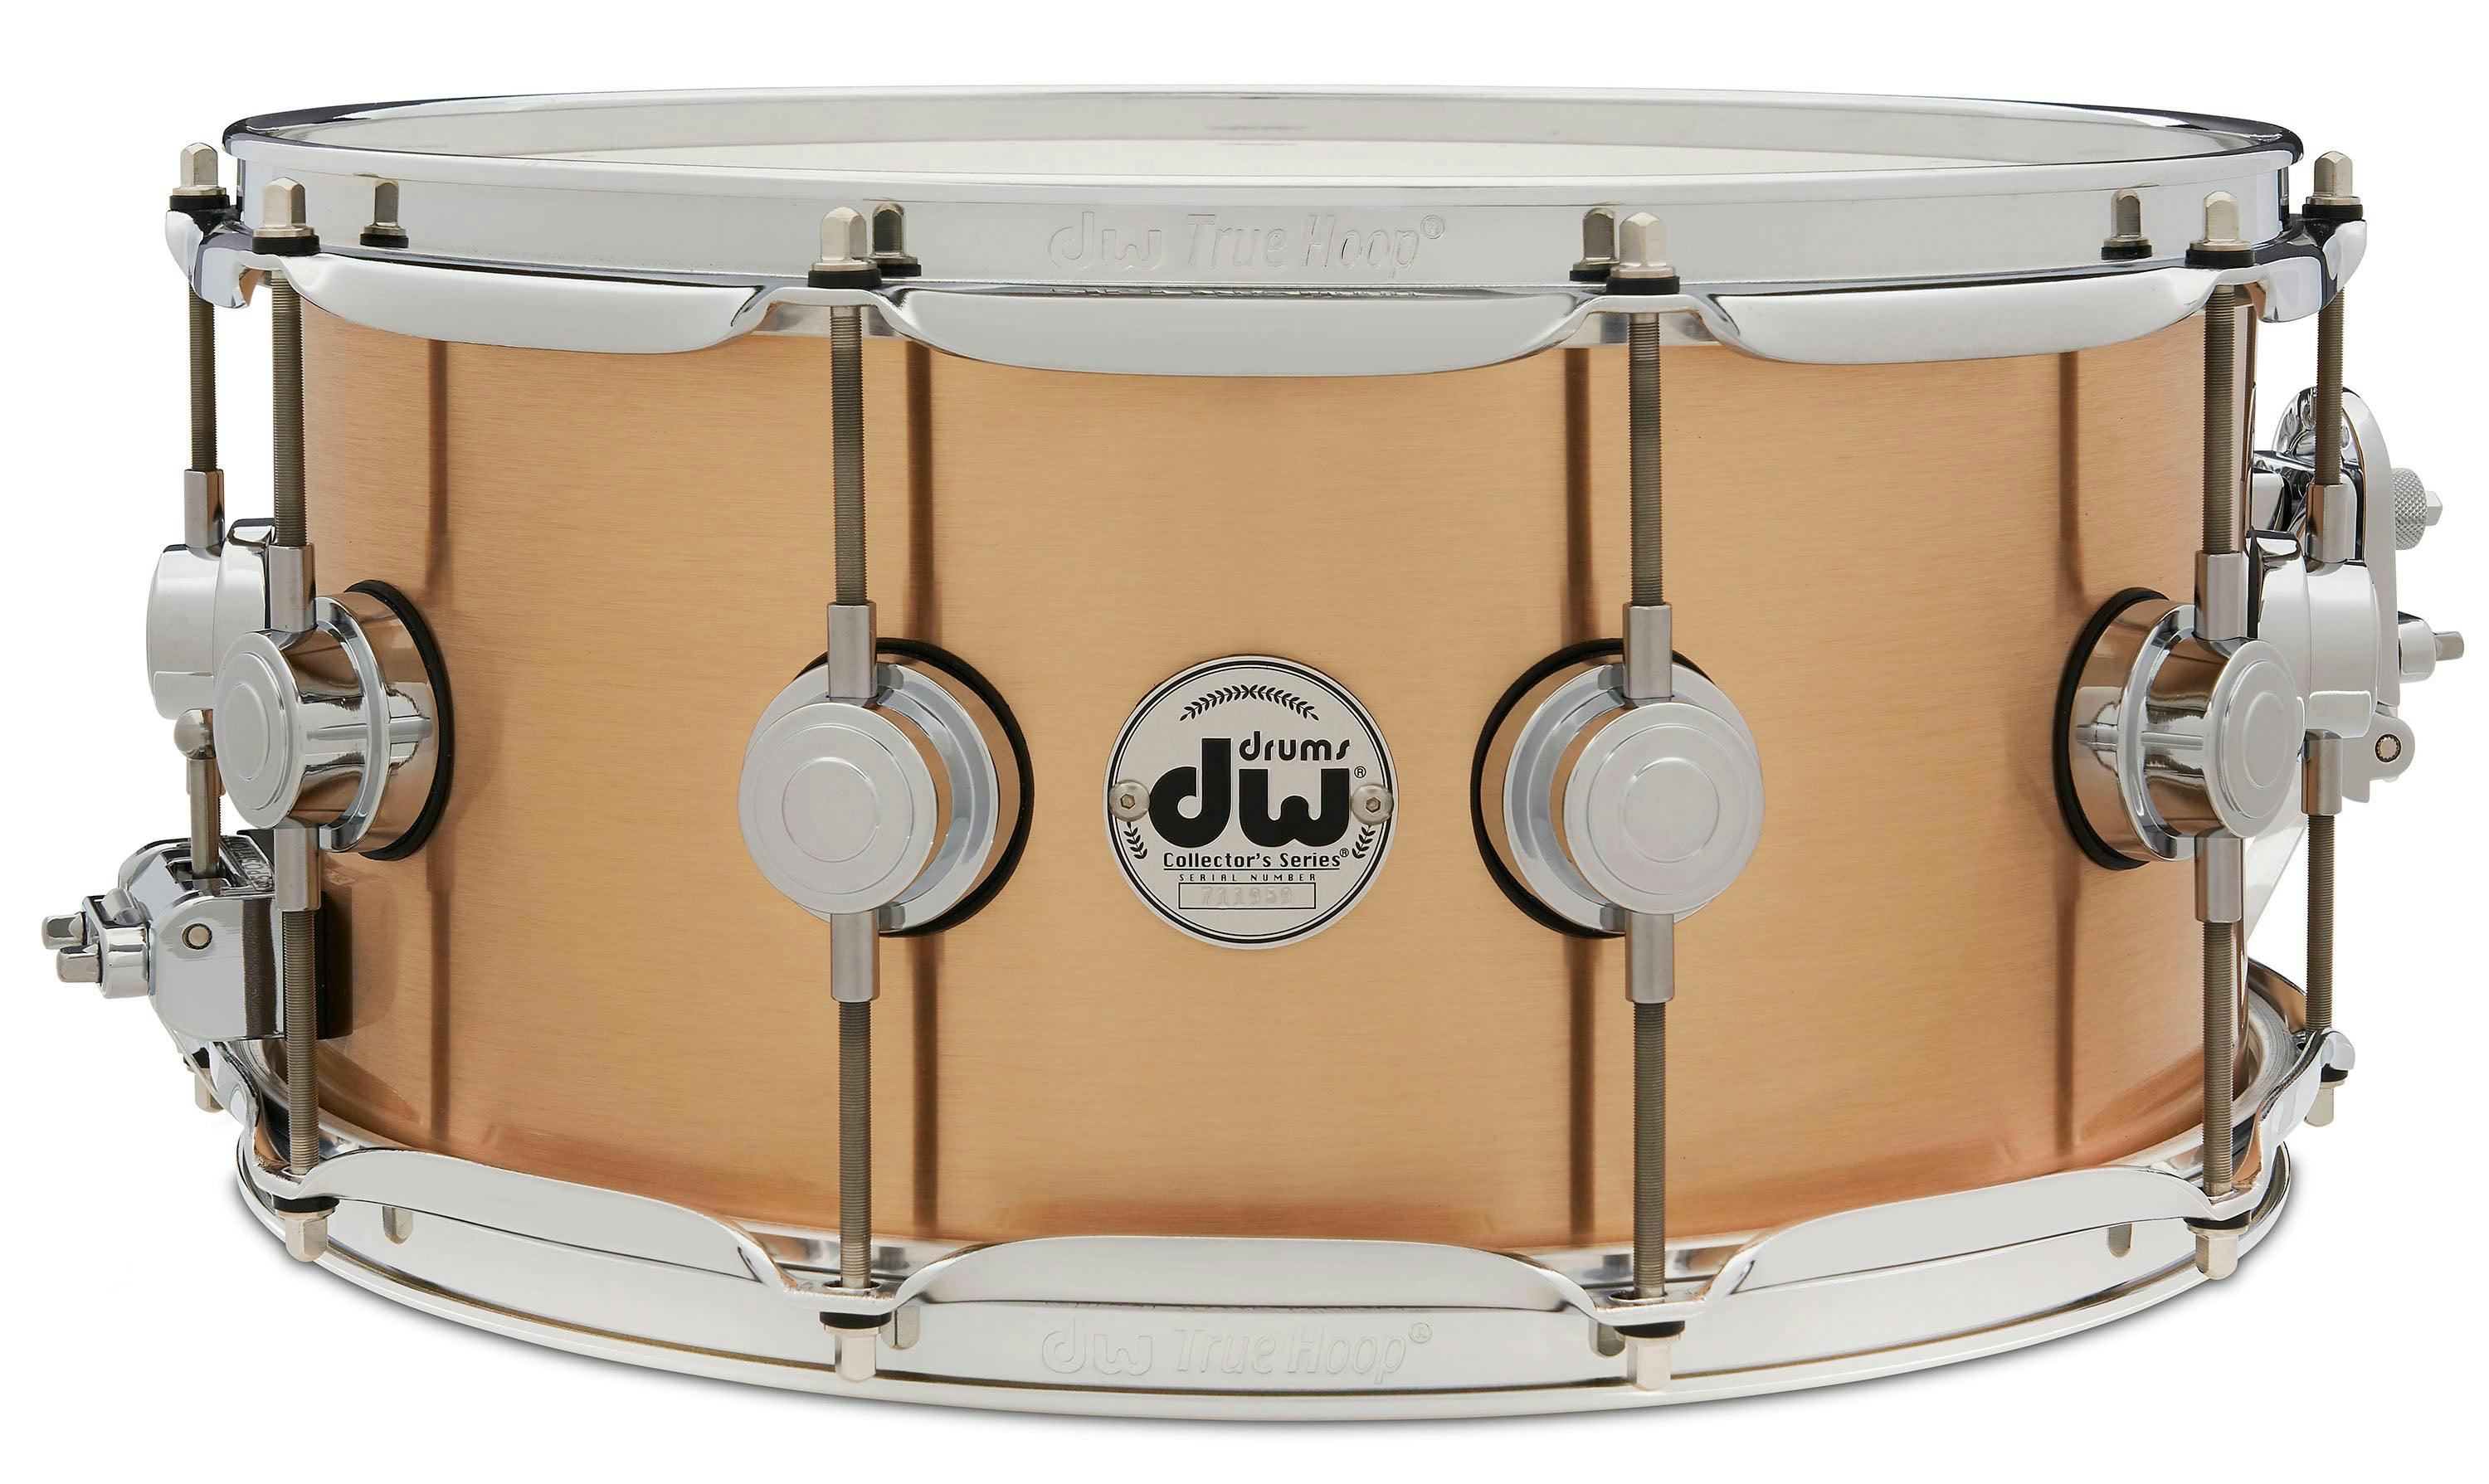 PartId DRVZ6514SVC - Brushed Bronze Snare Drum 6 5x14 Product Image